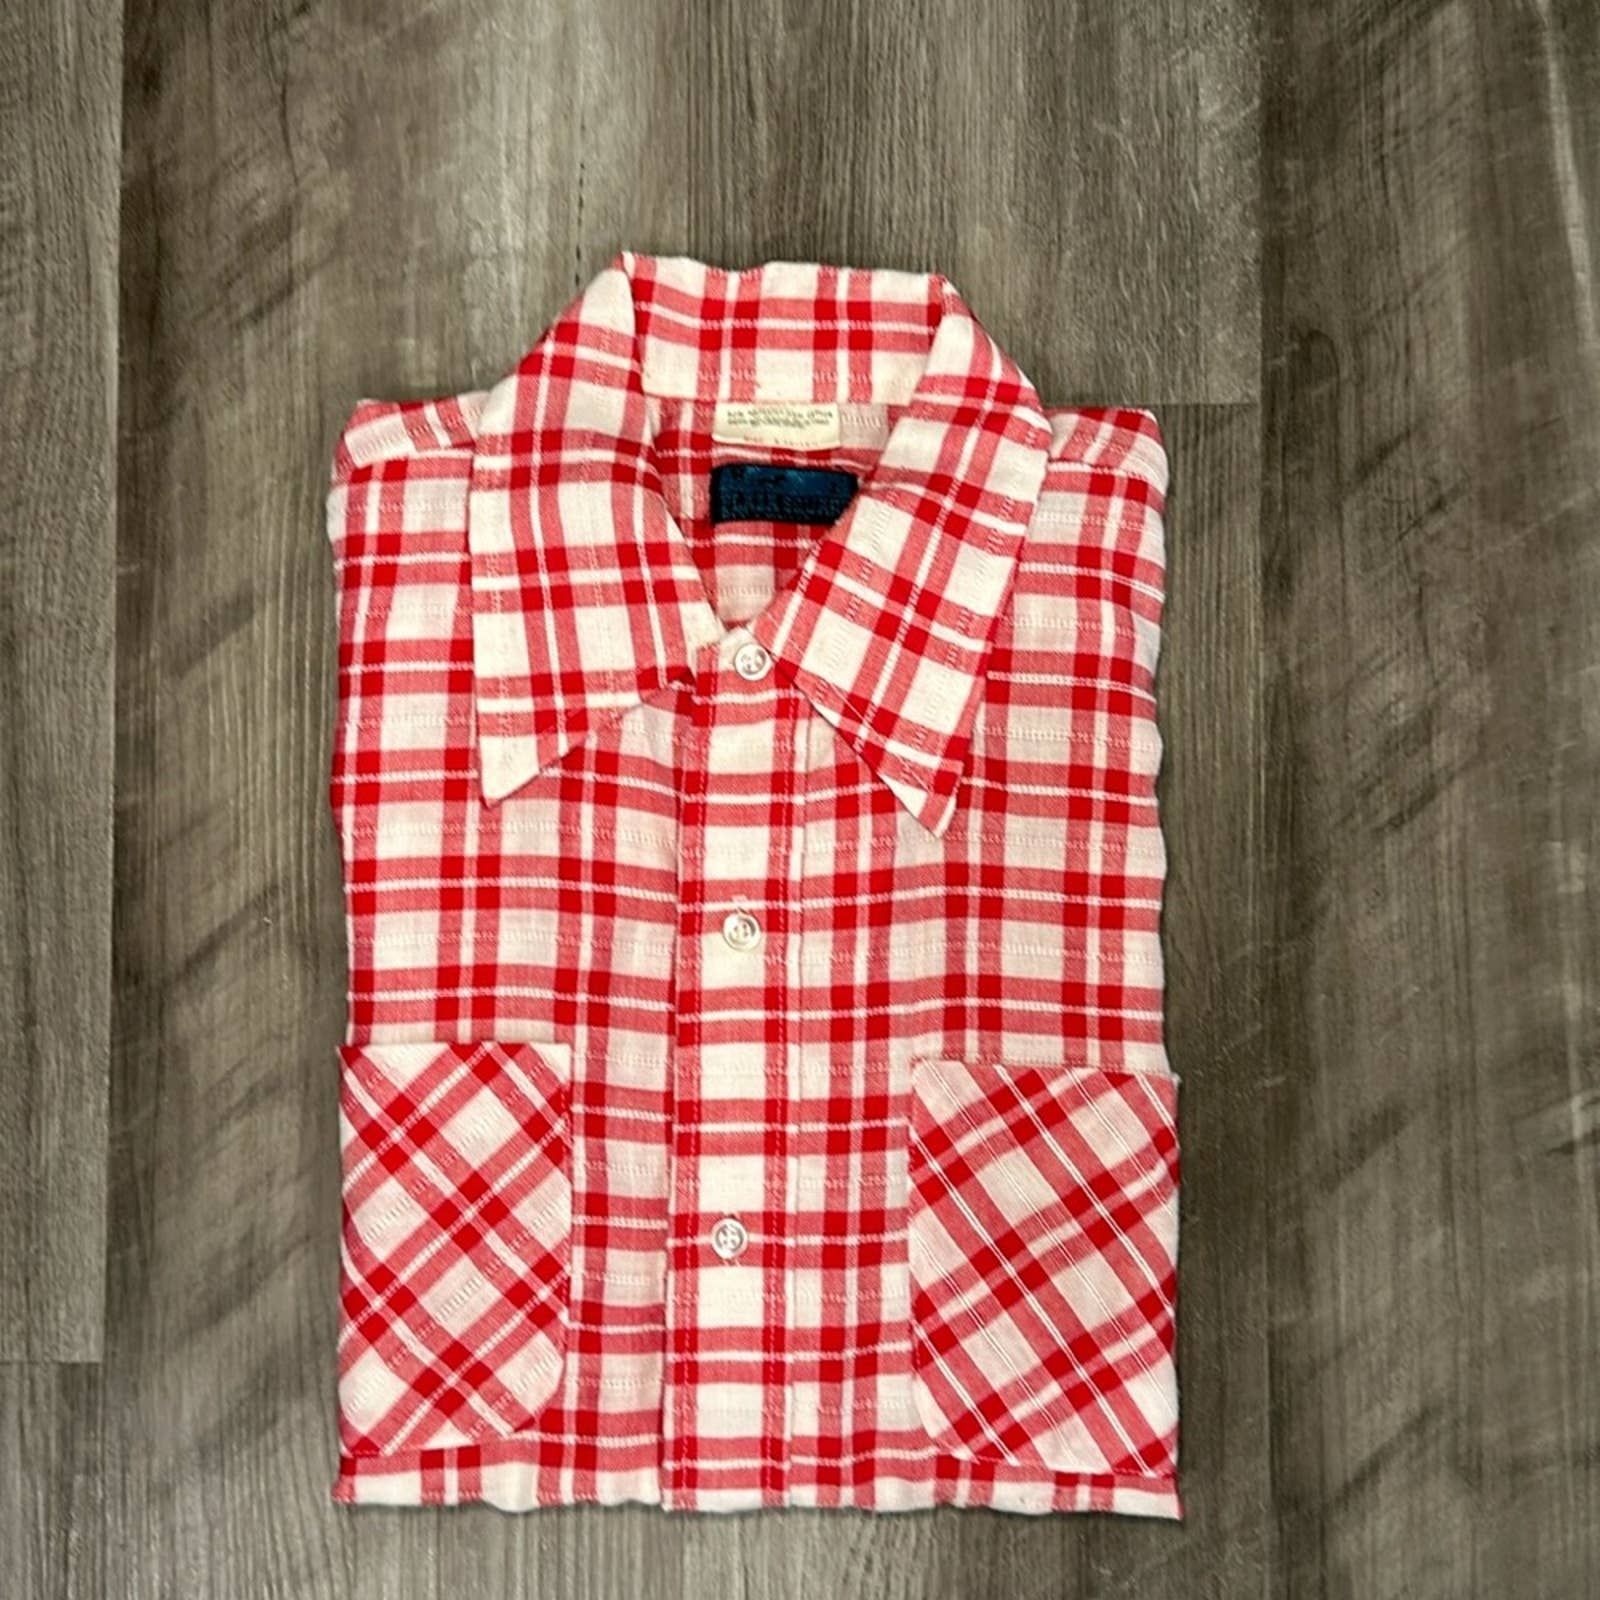 1 Plaza Square by Ely and Walker Western Short Sleeve Size US S / EU 44-46 / 1 - 1 Preview